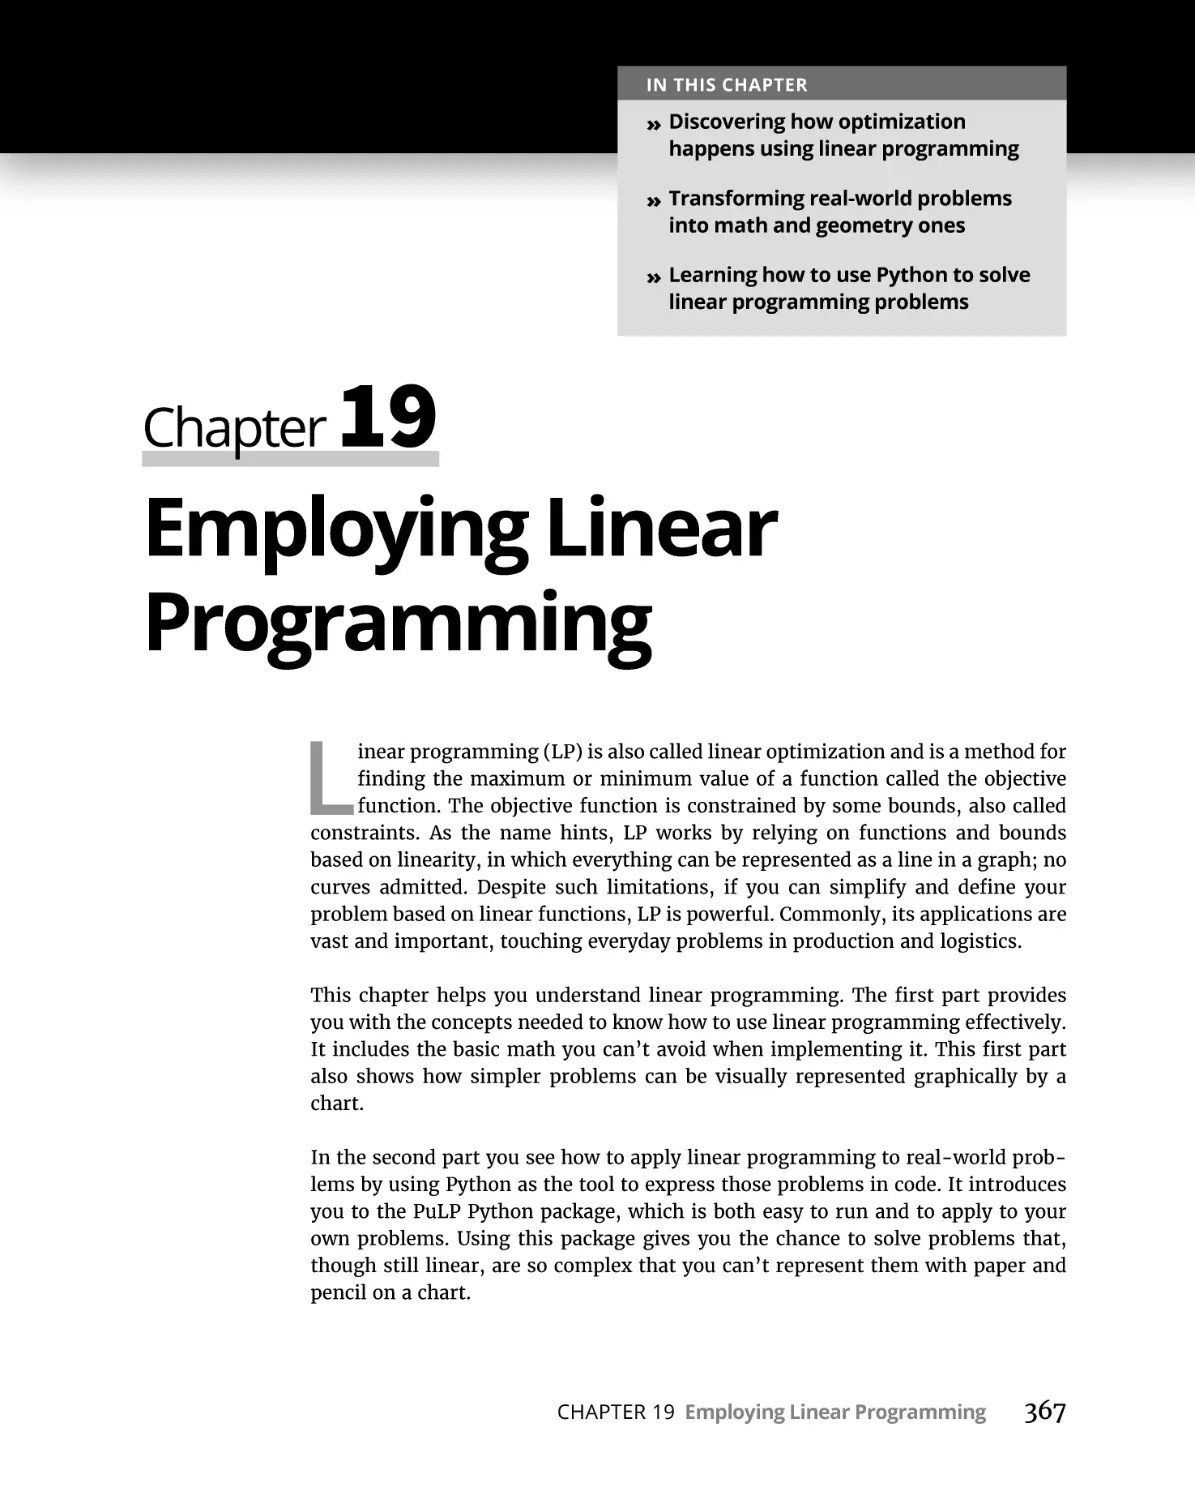 Chapter 19 Employing Linear Programming